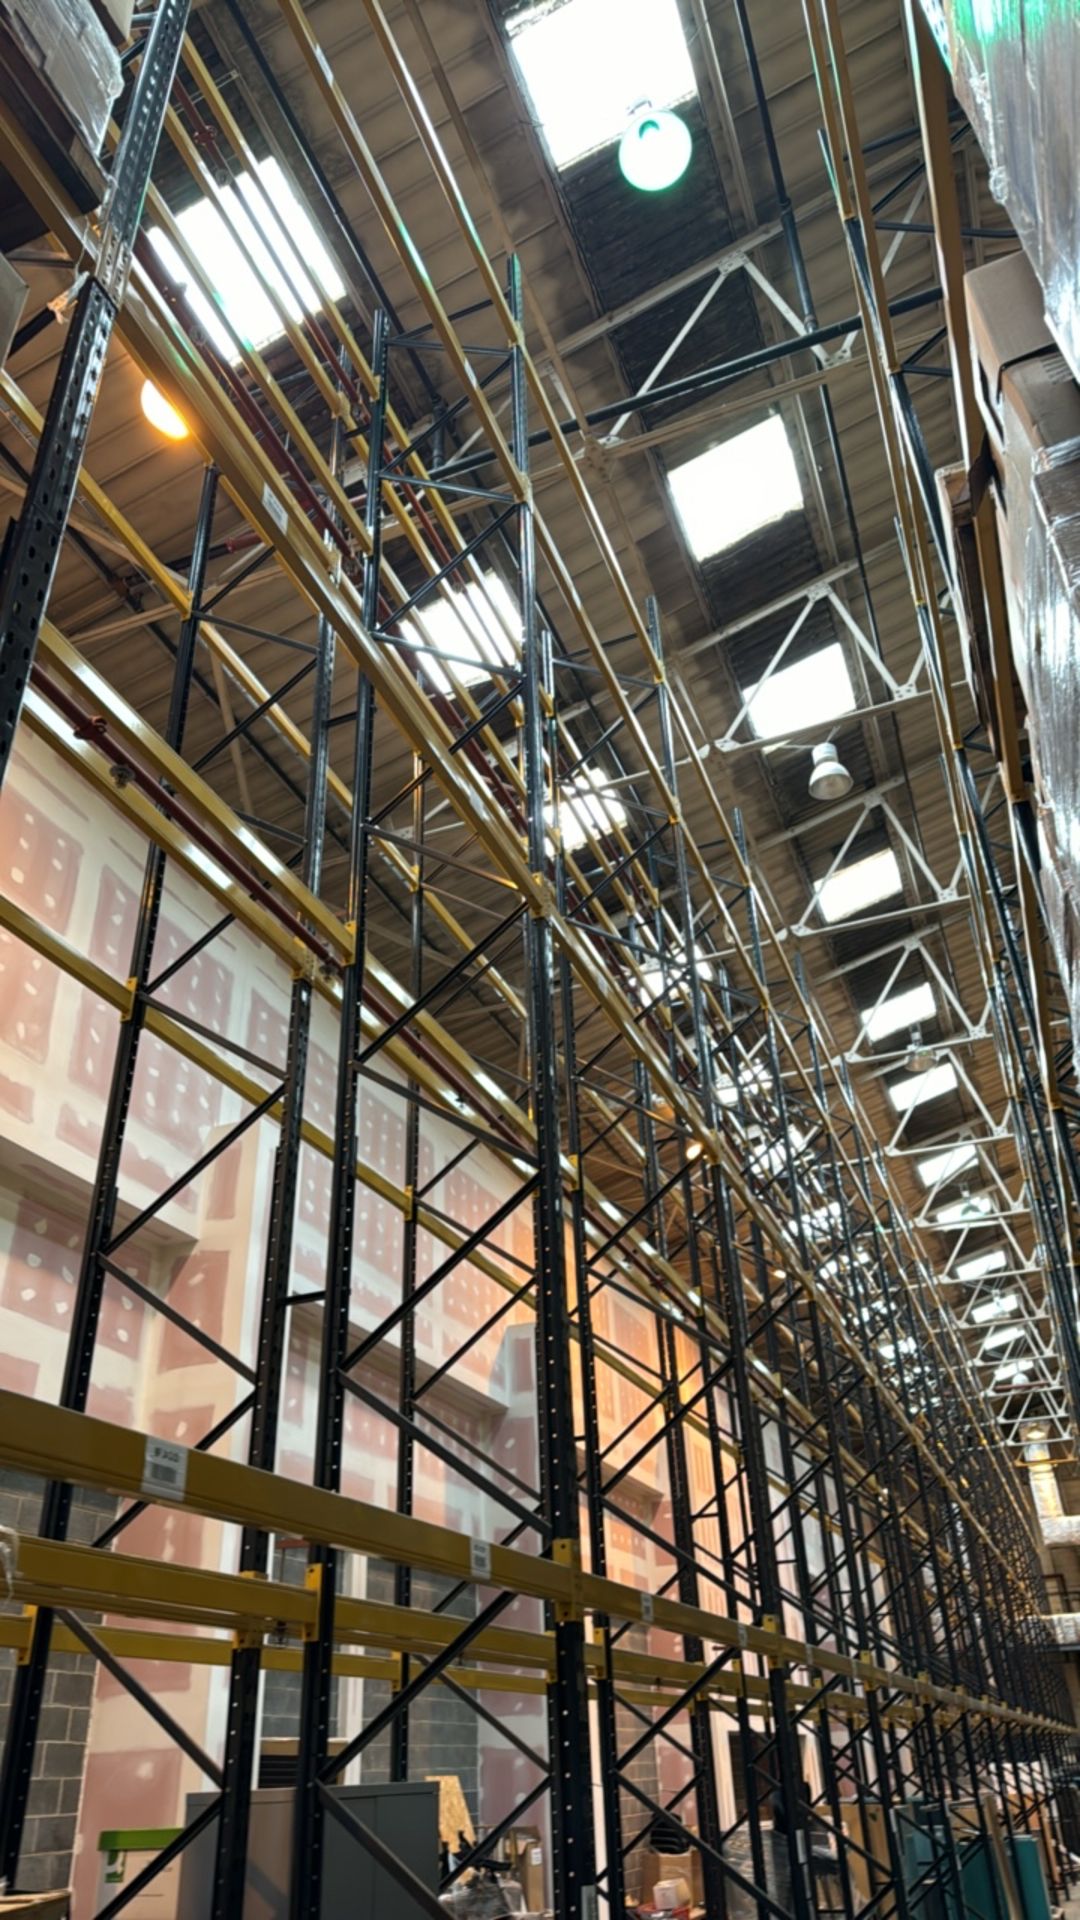 Run Of 23 Bays Of Back To Back Boltless Industrial Pallet Racking - Image 12 of 12